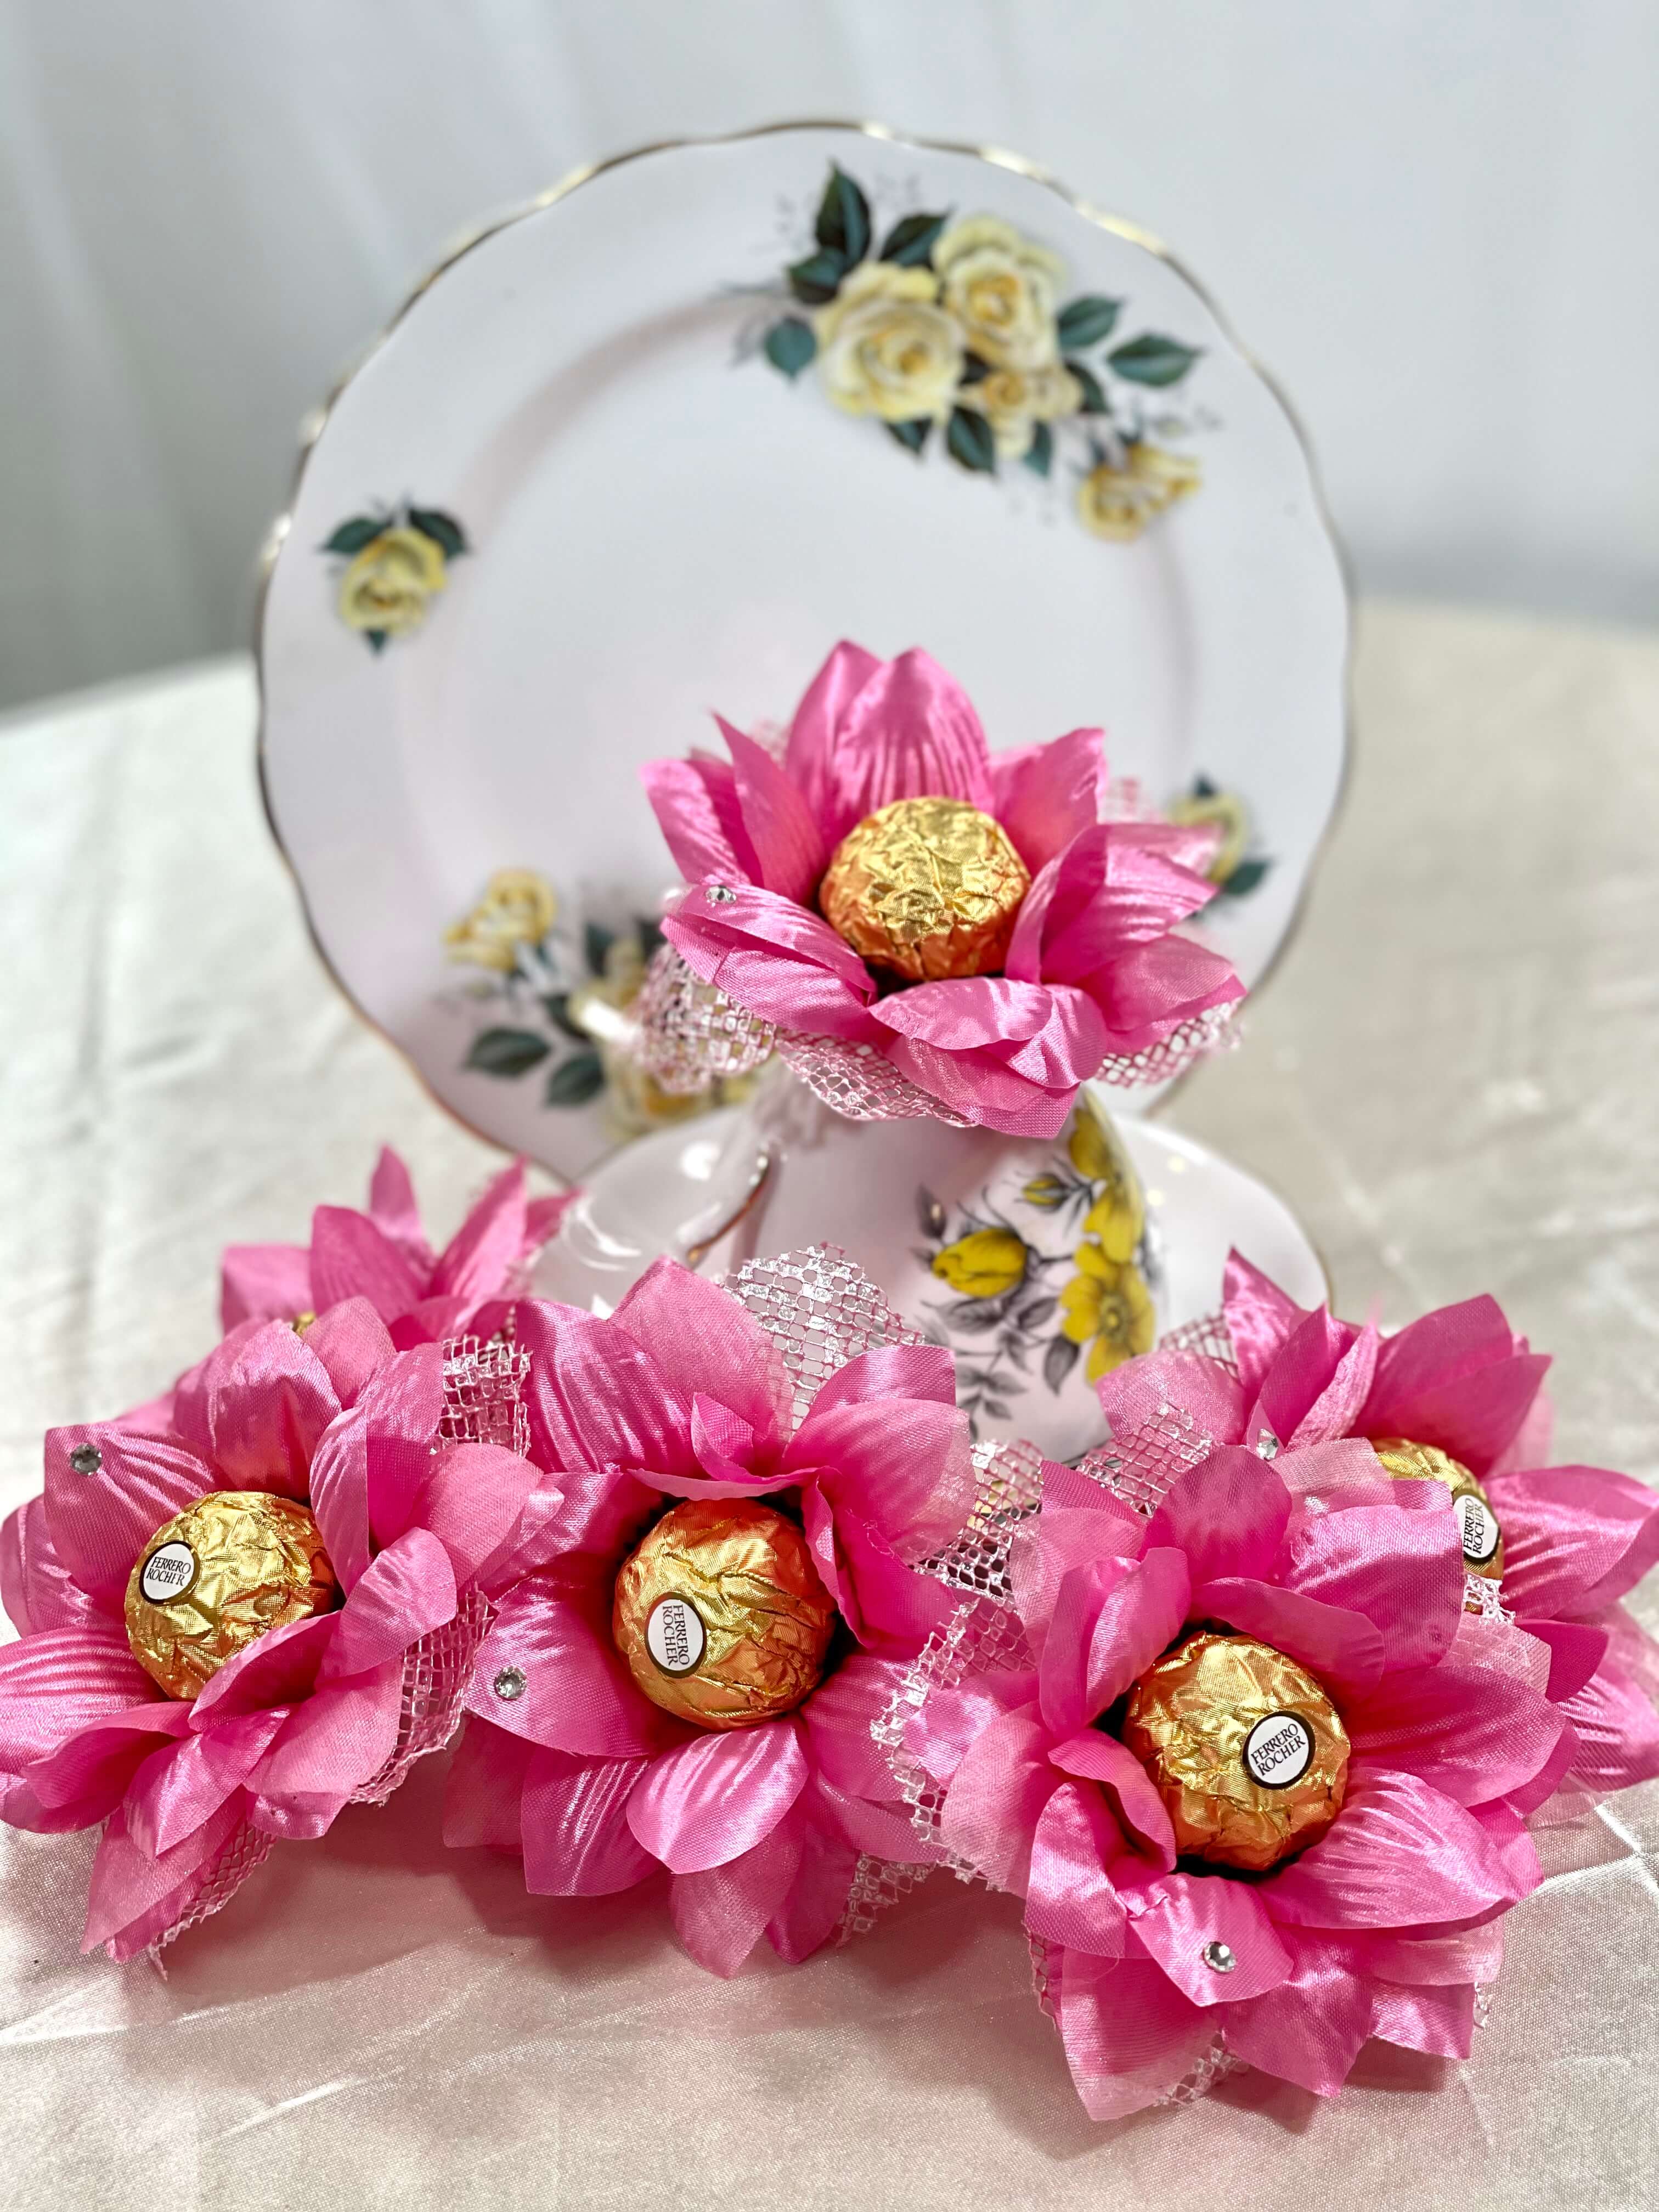 Light Pink Flowers For Easter Gift Idea Spring Home Decor Table Centerpieces